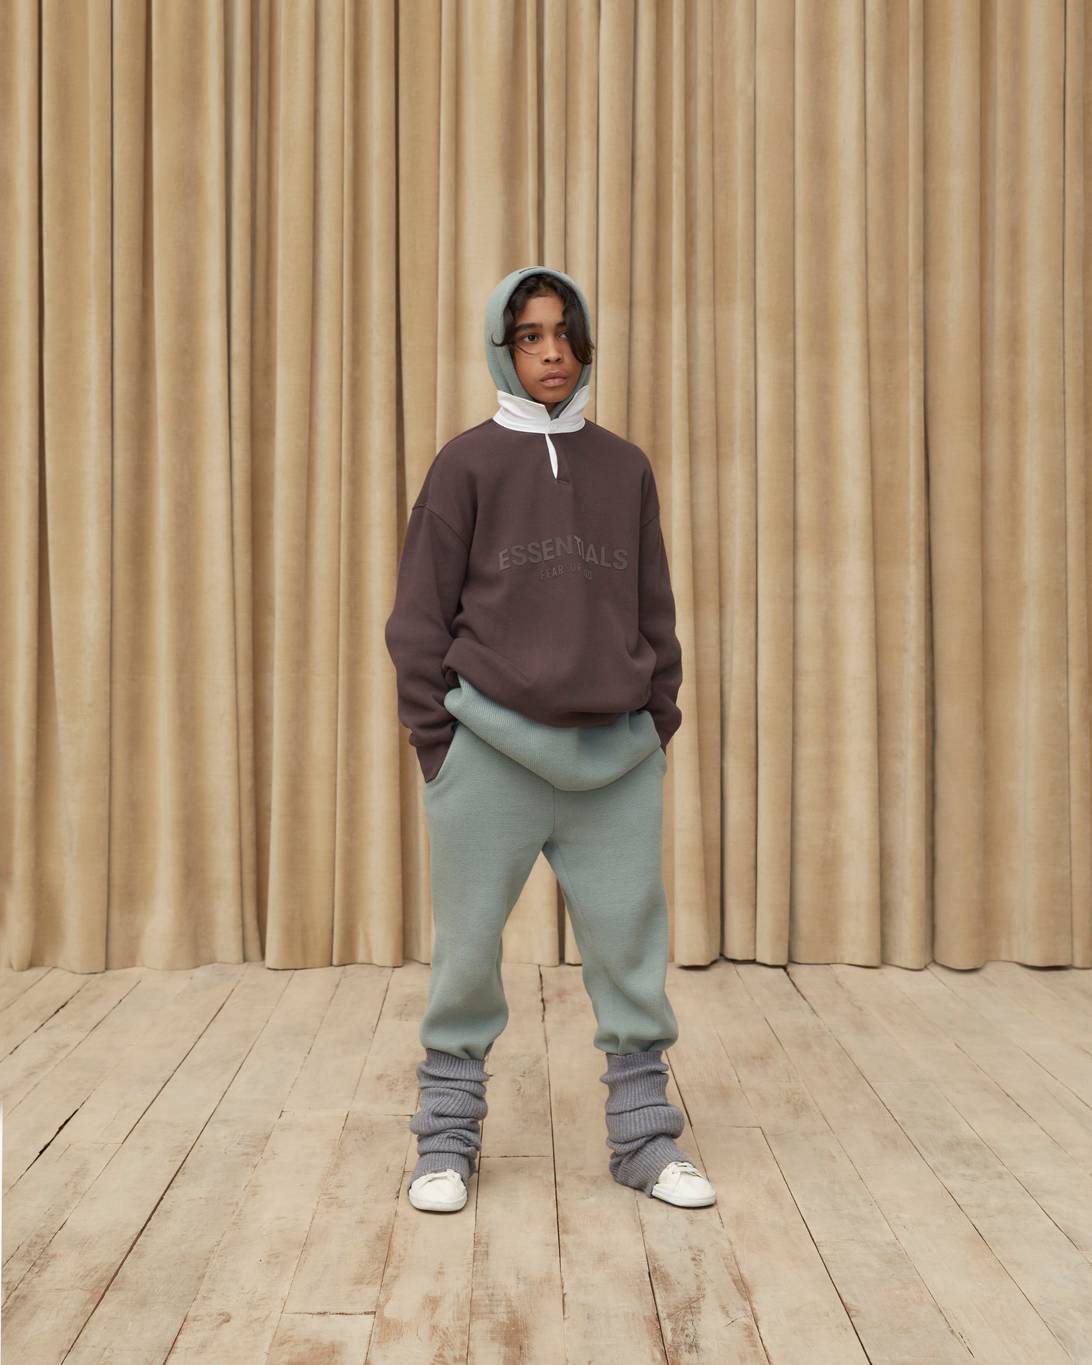 When you try to show off the new Fear of God outfit but you end up